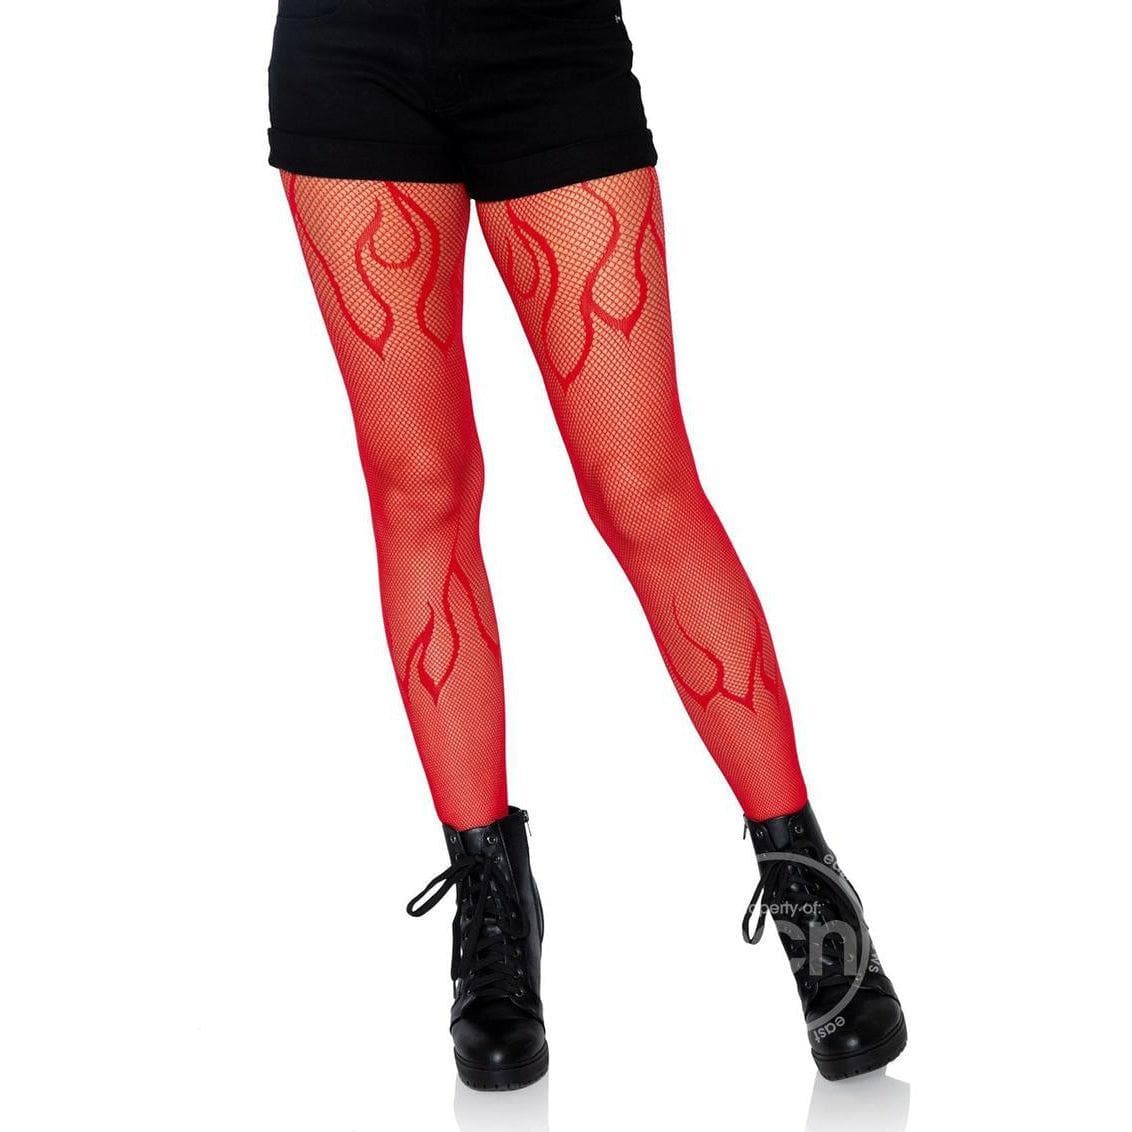 Leg Avenue Flame Net Tights Red - Romantic Blessings